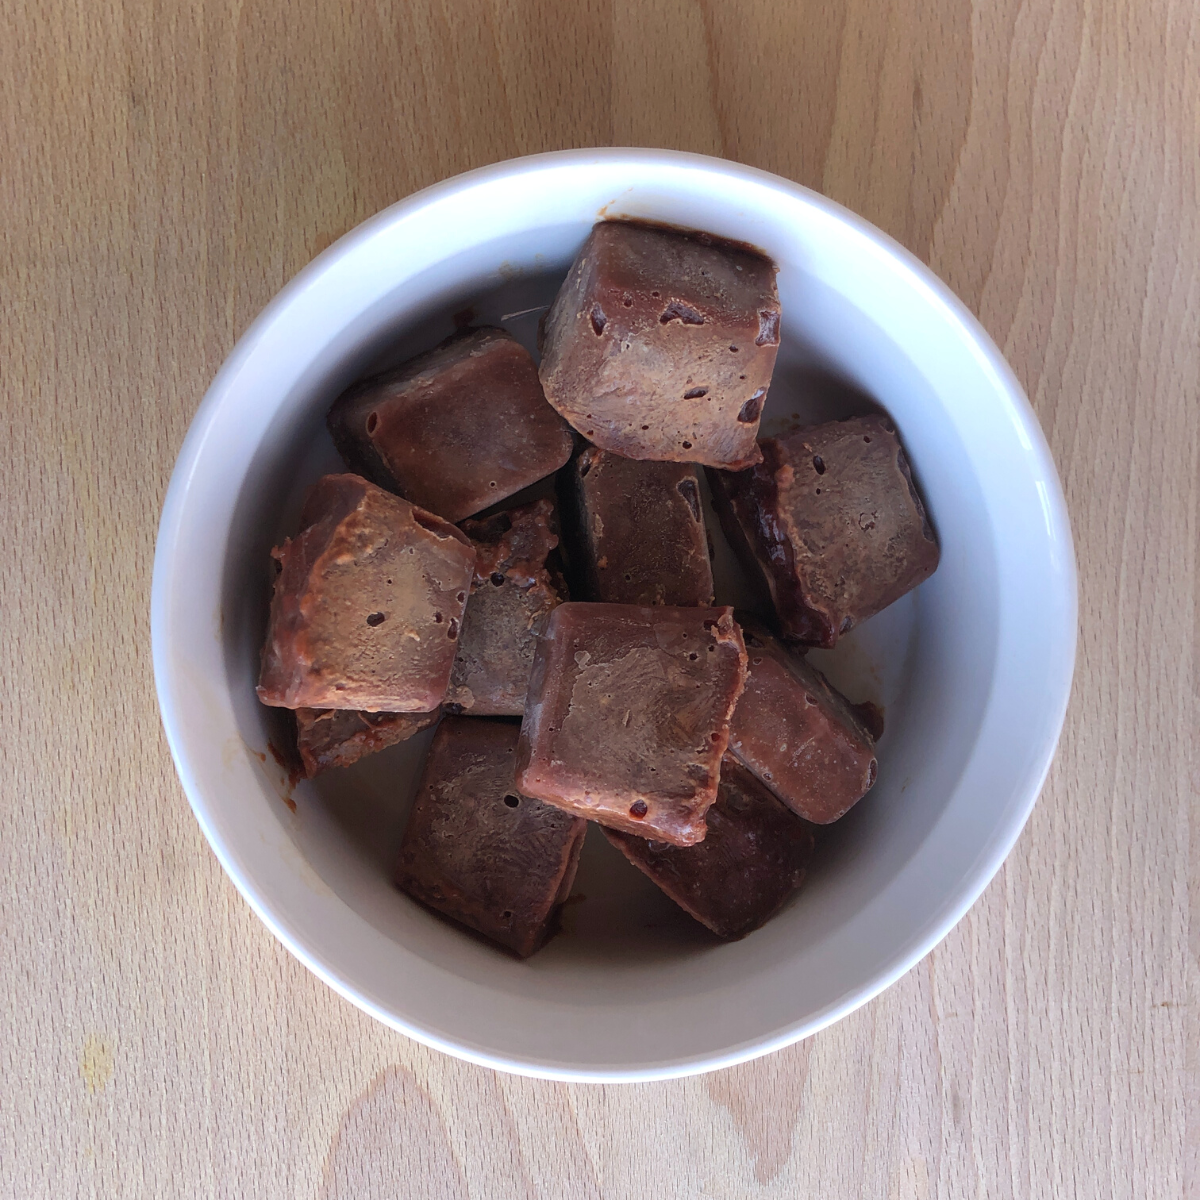 Beef Liver Cubes: How to Hide Liver in Food - Clover Meadows Beef